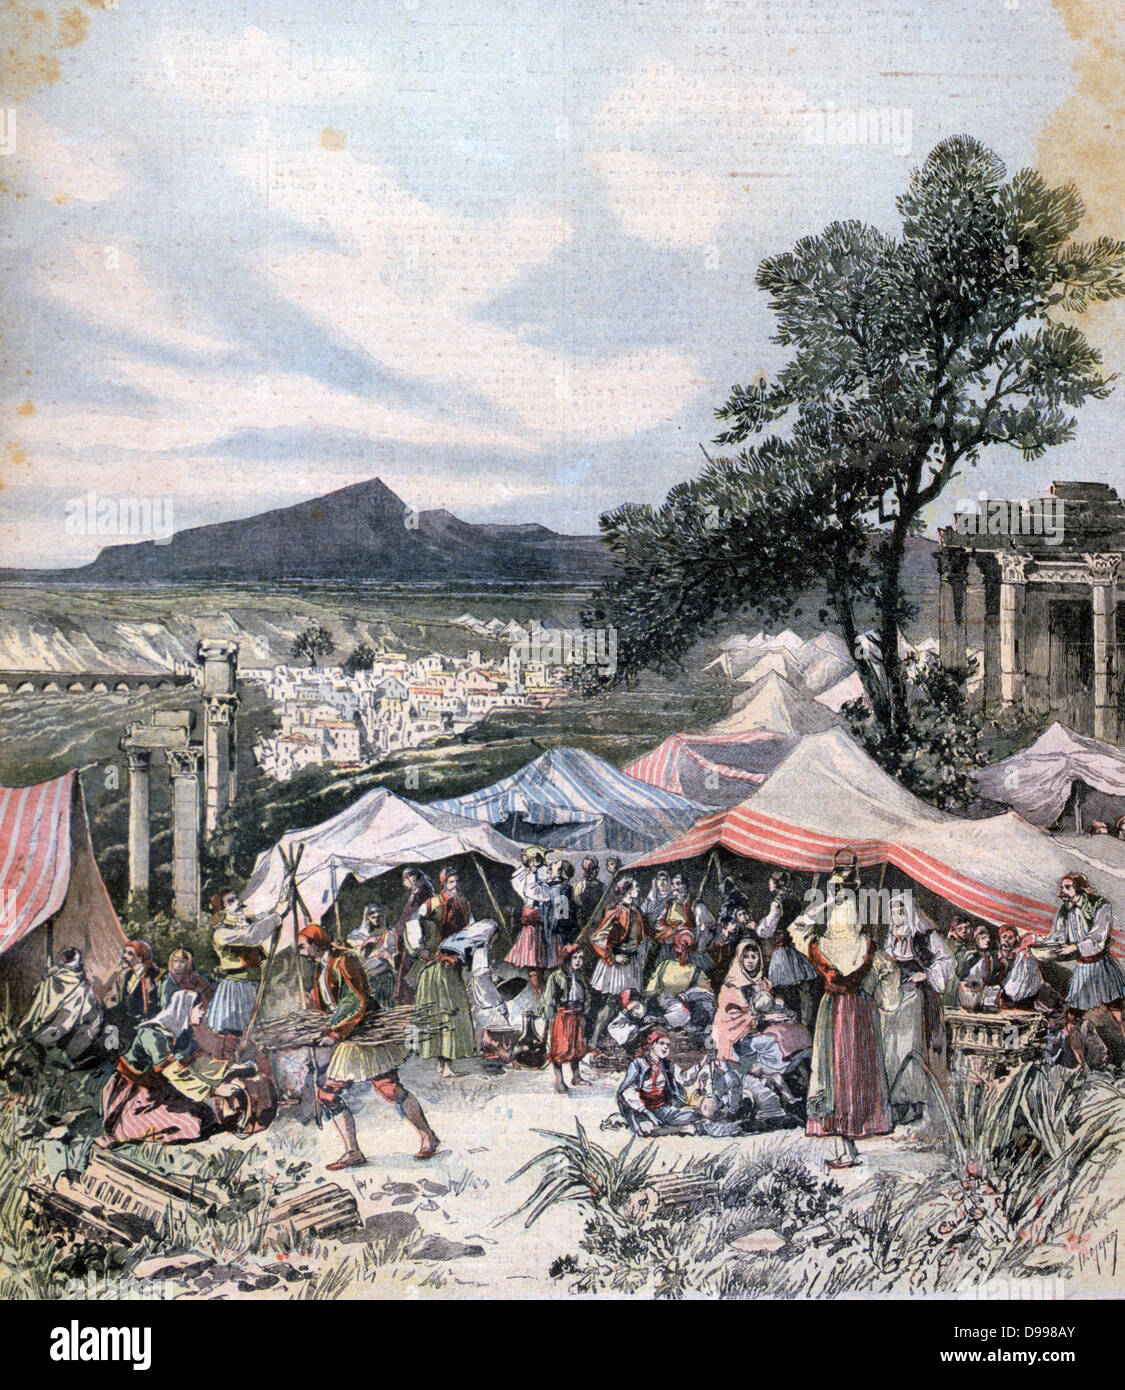 Earthquake at Thebes, Greece: Tents erected to shelter people made homeless. Few people were killed but the damage was extensive. From 'Le Petit Journal', Paris, 17 June 1893.  Geology, Destruction Stock Photo